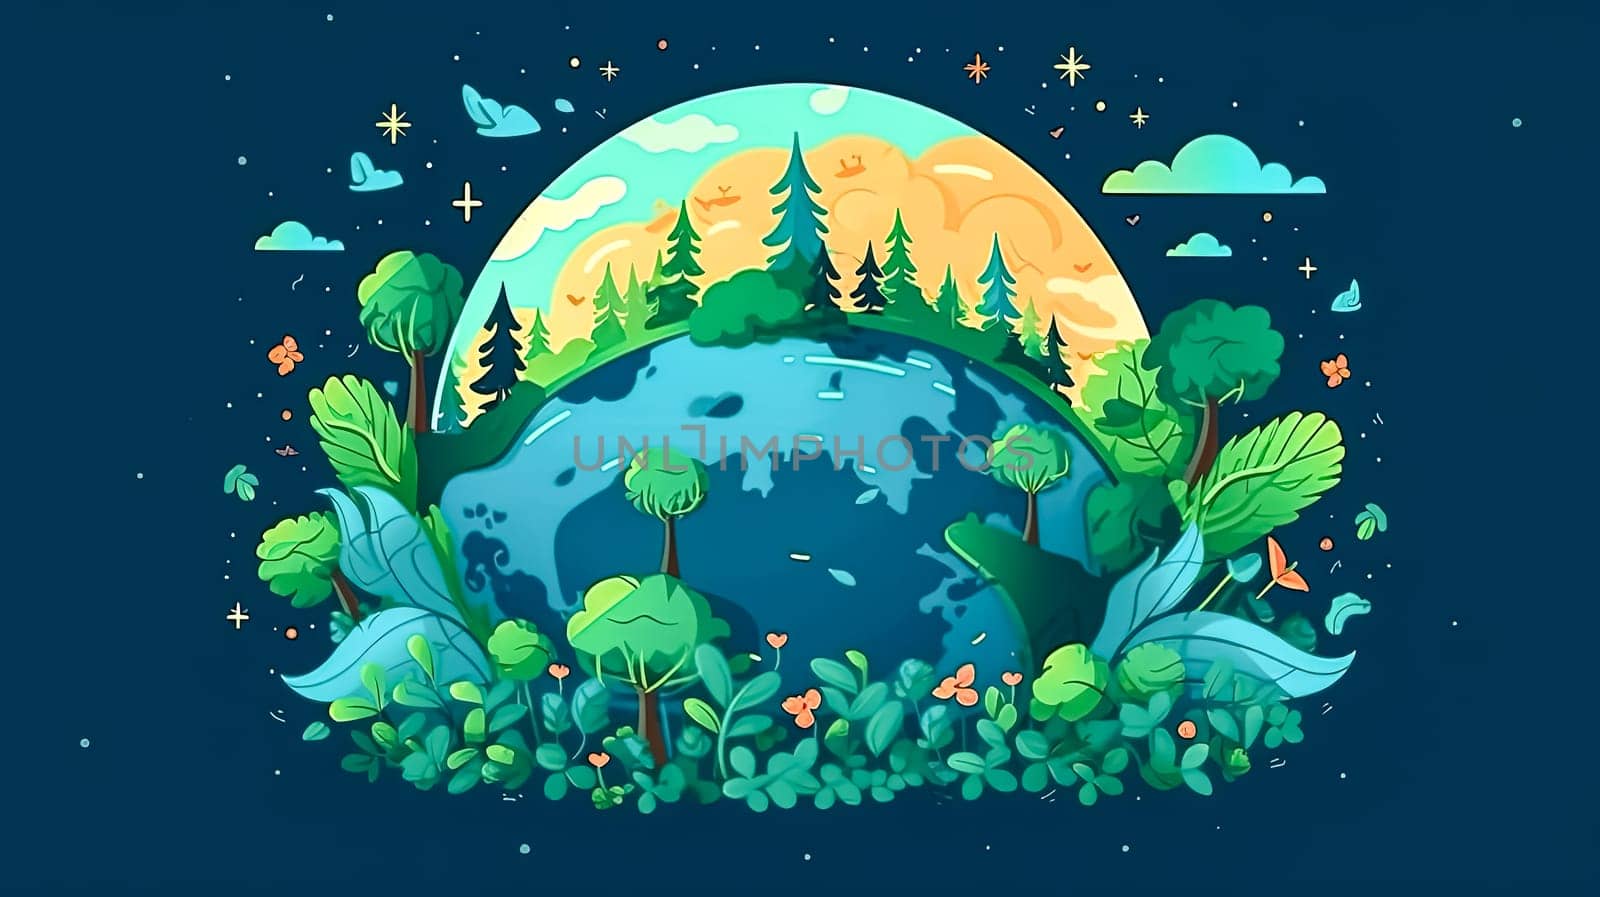 Global harmony, People against a backdrop of green landscapes a collective pledge for nature conservation, celebrating Earth Day with unity and purpose